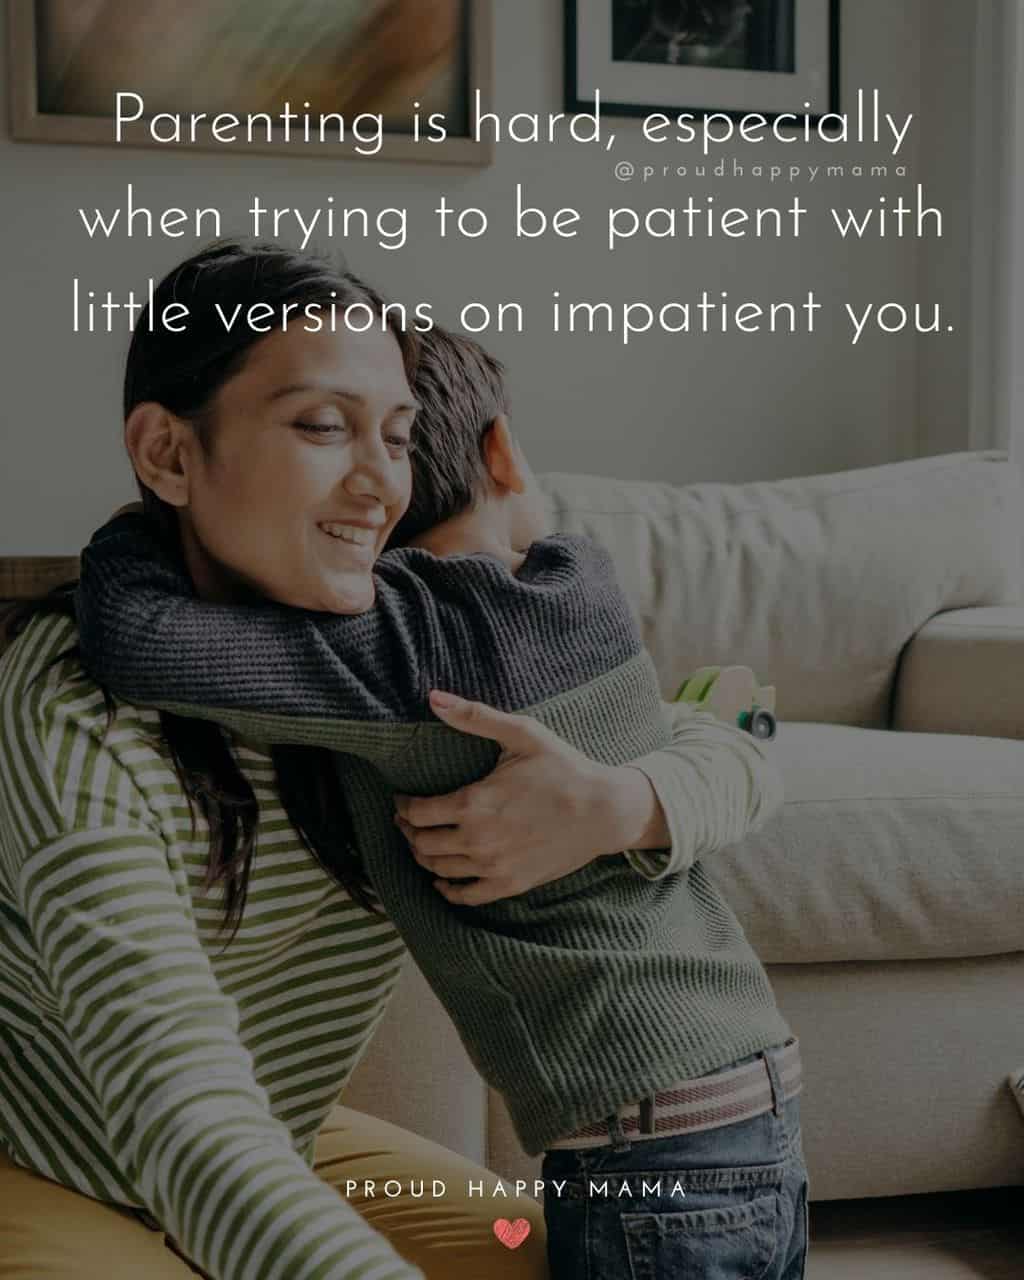 Parenting Quotes - Parenting is hard, especially when trying to be patient with little versions on impatient you.’